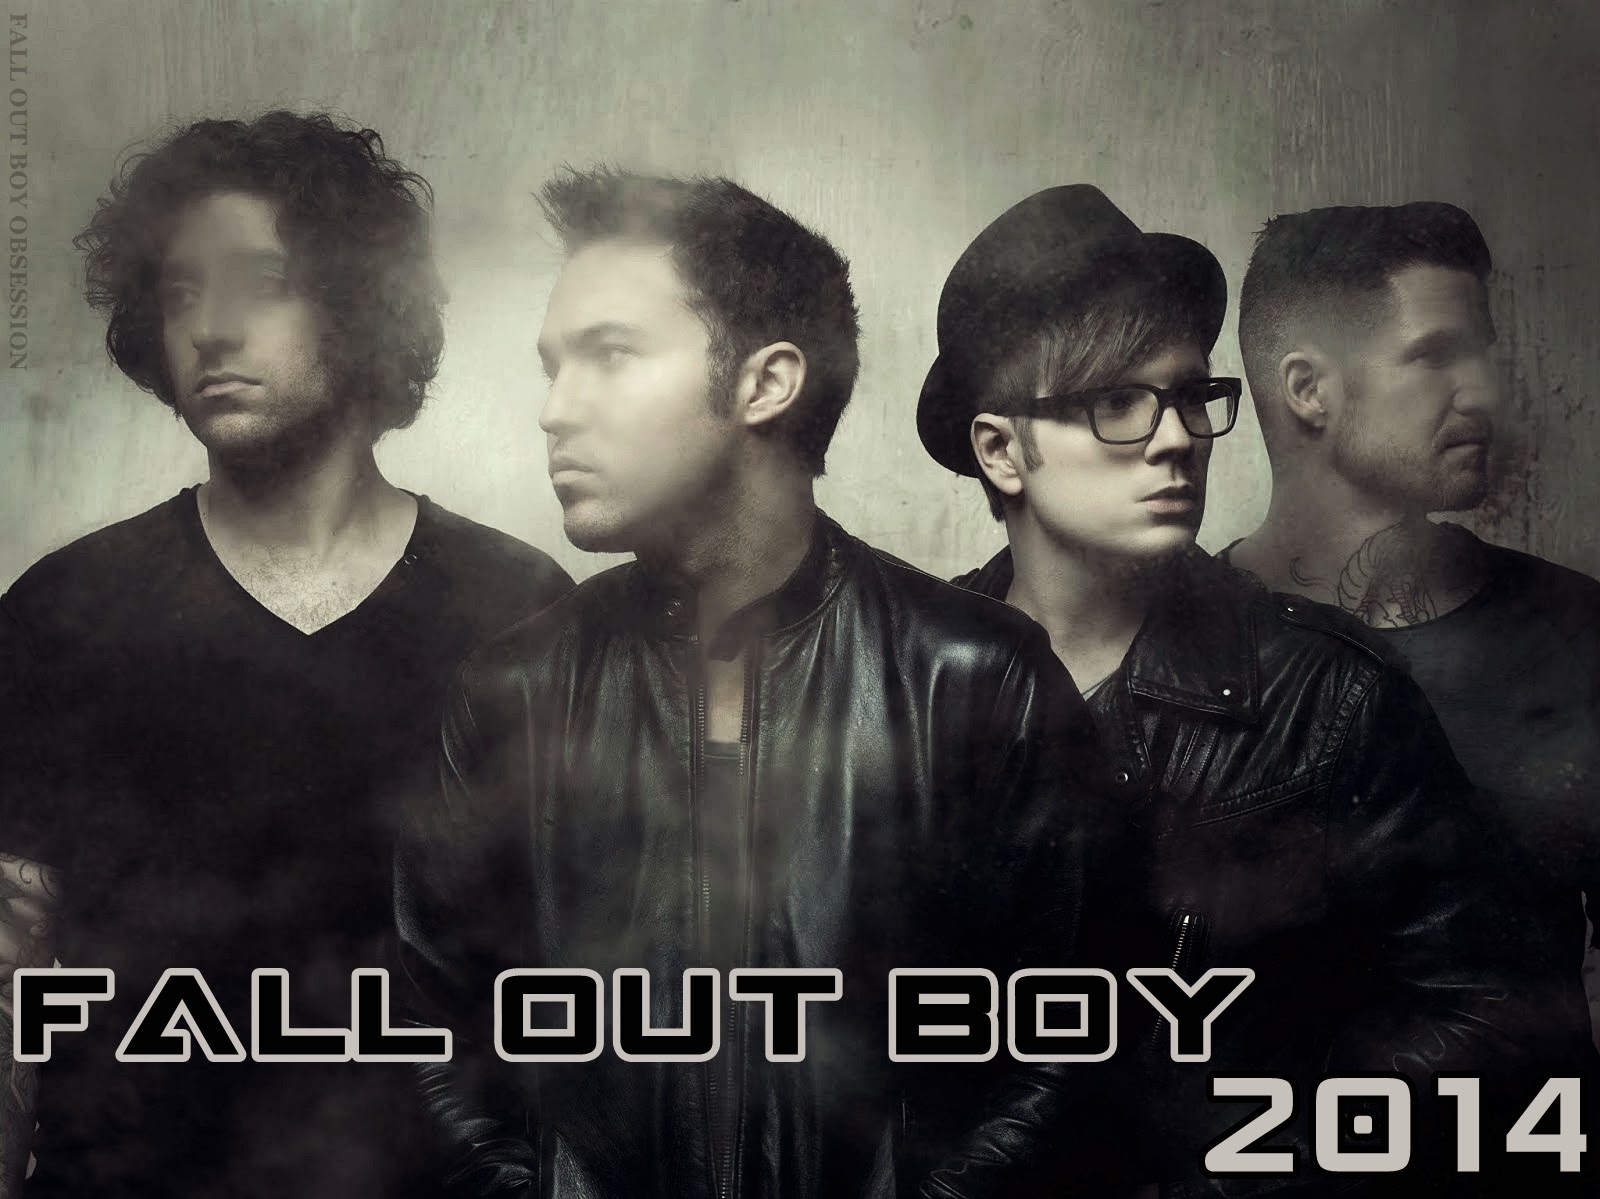 Fall Out Boy Wallpaper Fob Obsession